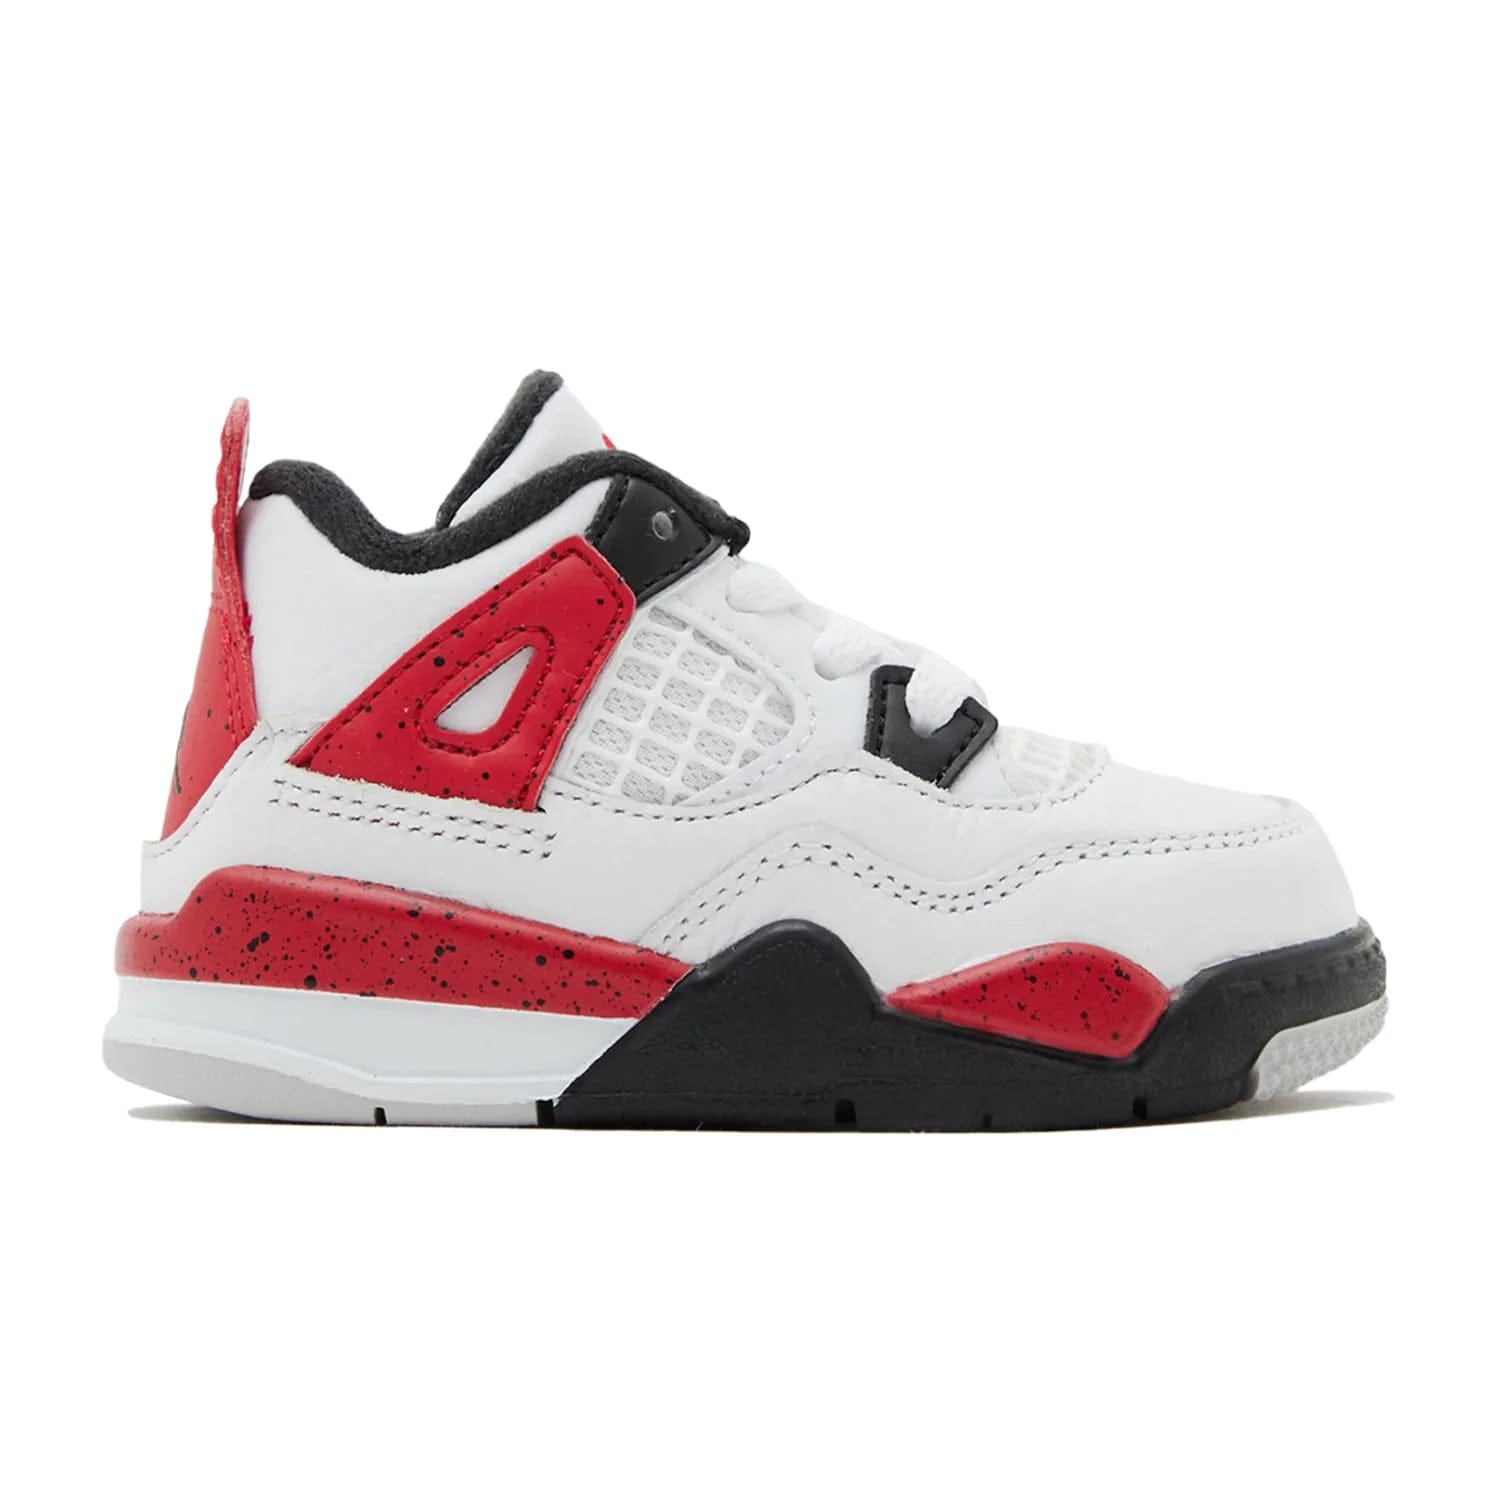 Jordan 4 Retro Red Cement (TD) - Image 1 - Only at www.BallersClubKickz.com - Introducing the Jordan 4 Retro Red Cement (TD)! This timeless sneaker features a stylish mix of colors for a bold, classic look. Get your hands on these kicks while you can!